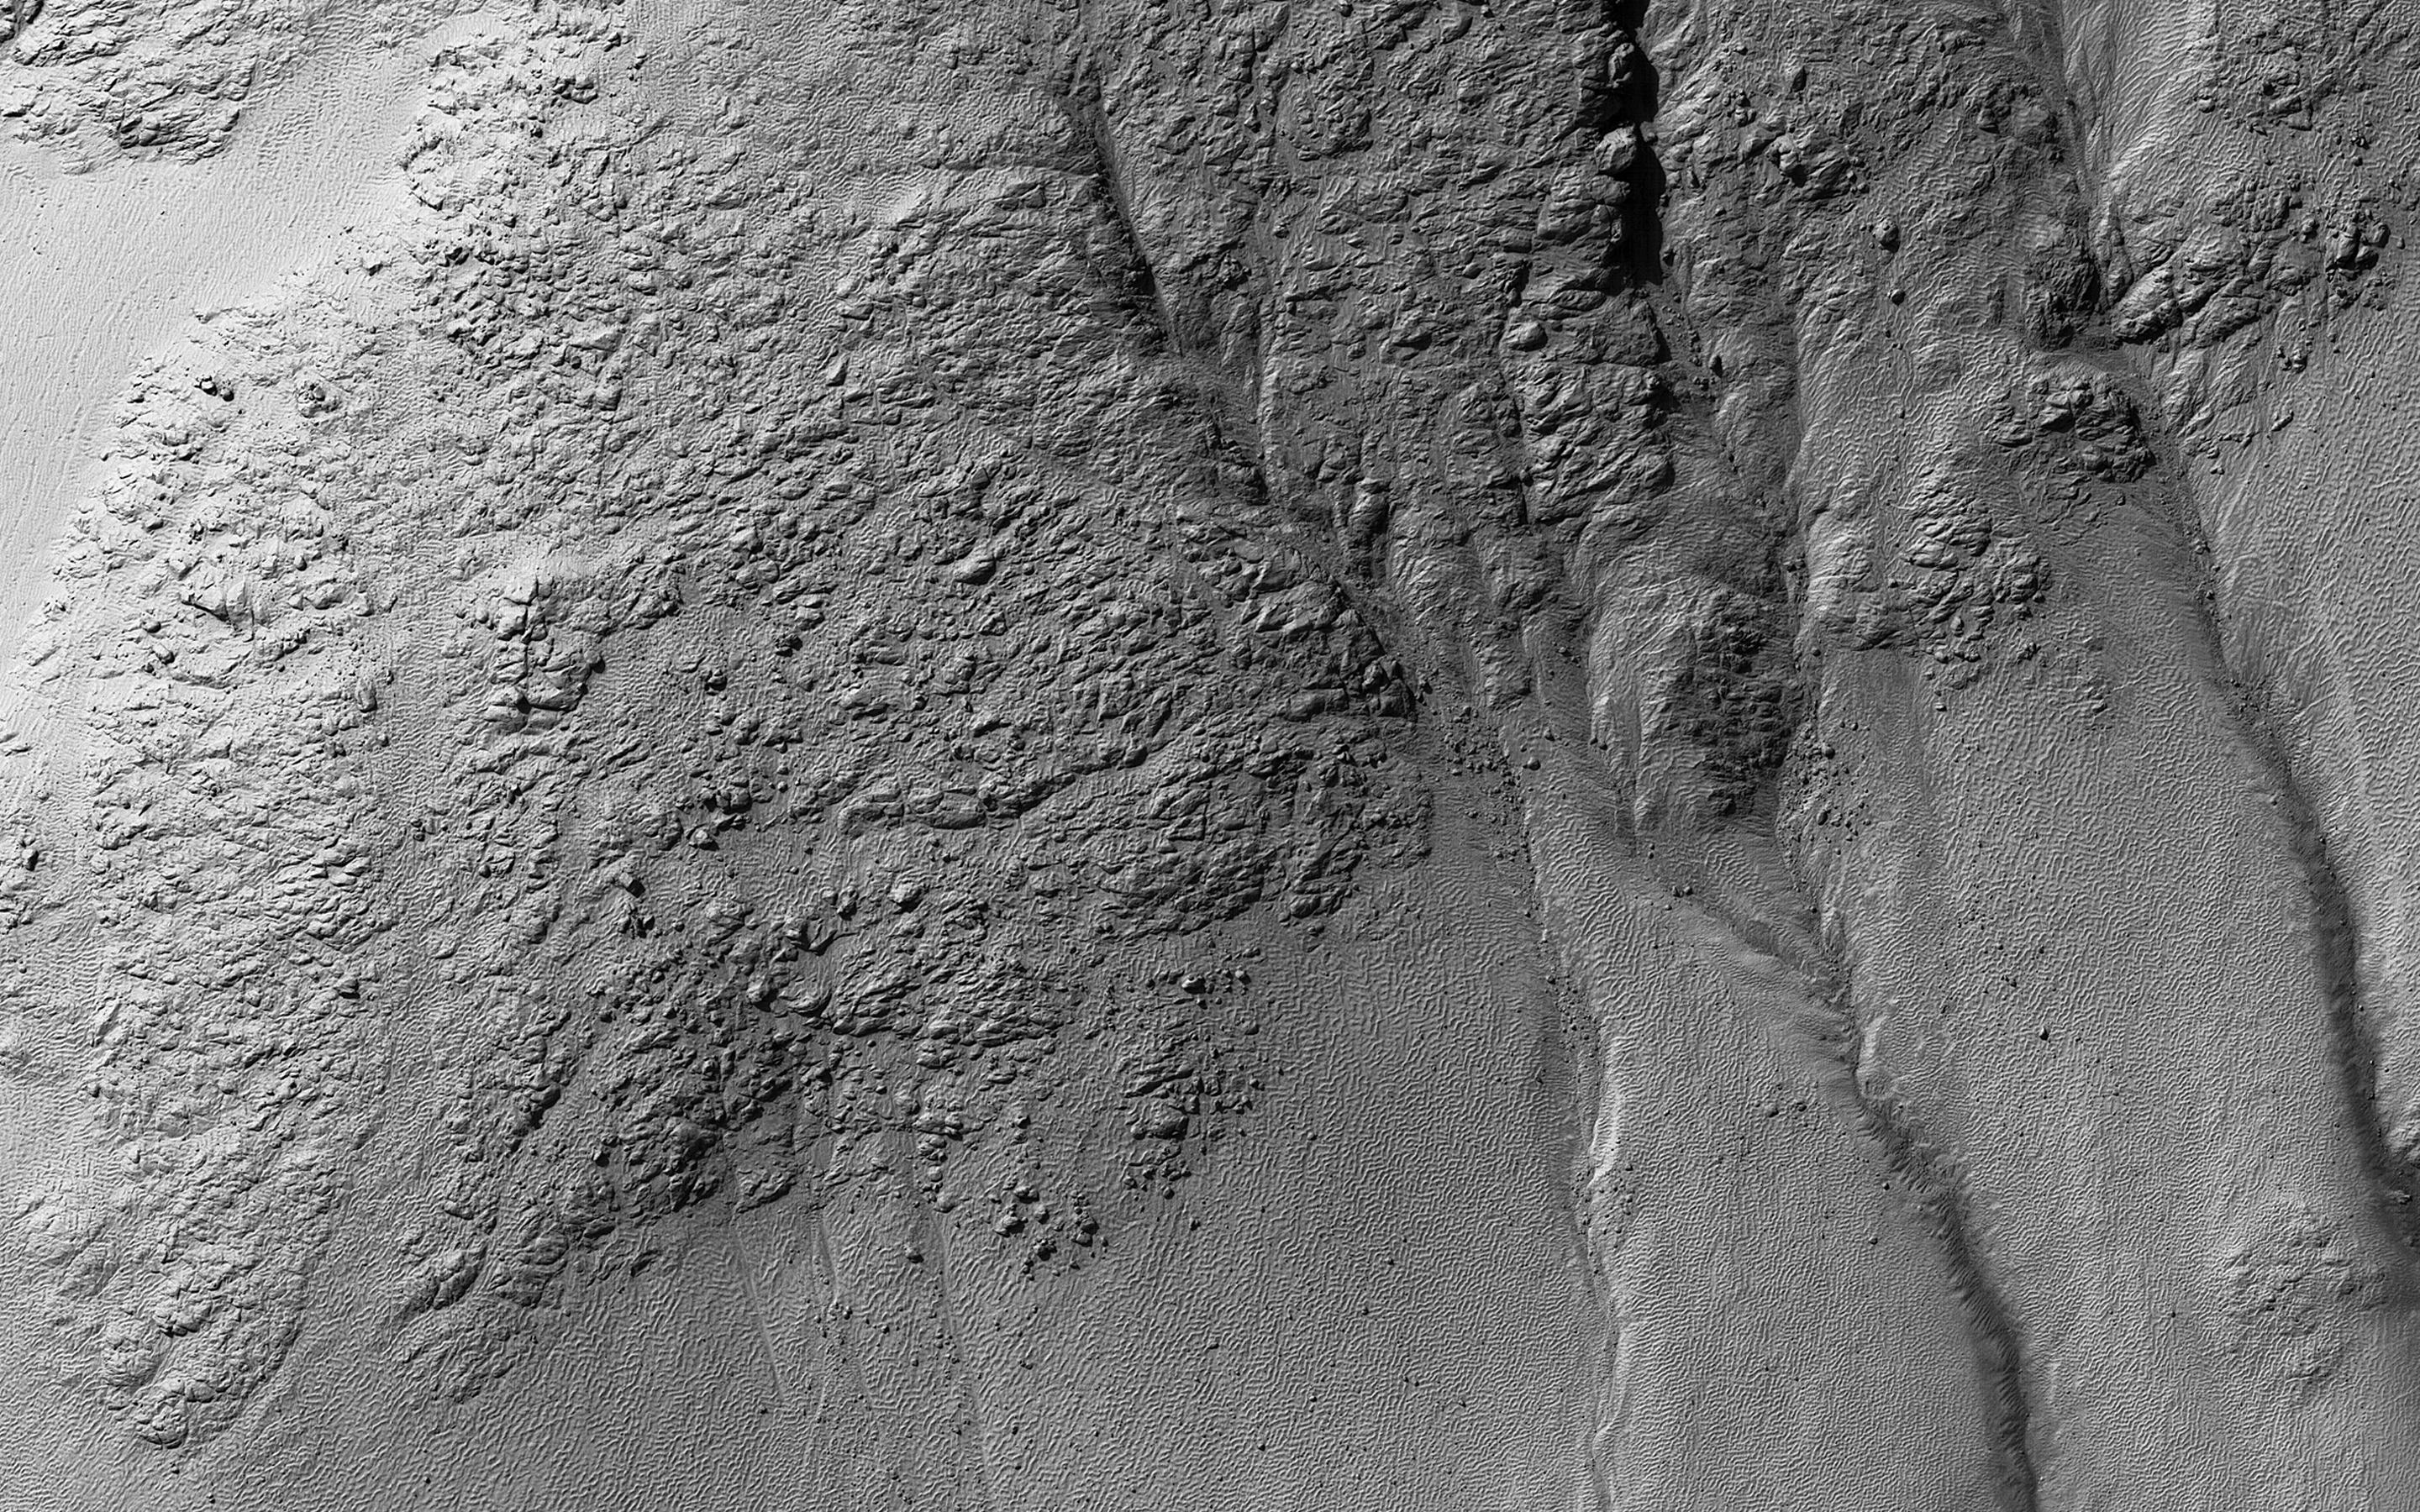 This image acquired on December 26, 2018 by NASAs Mars Reconnaissance Orbiter, shows the hills that resulted from uplifted rocks due to an impact that formed the 230-kilometer diameter Galle Crater.